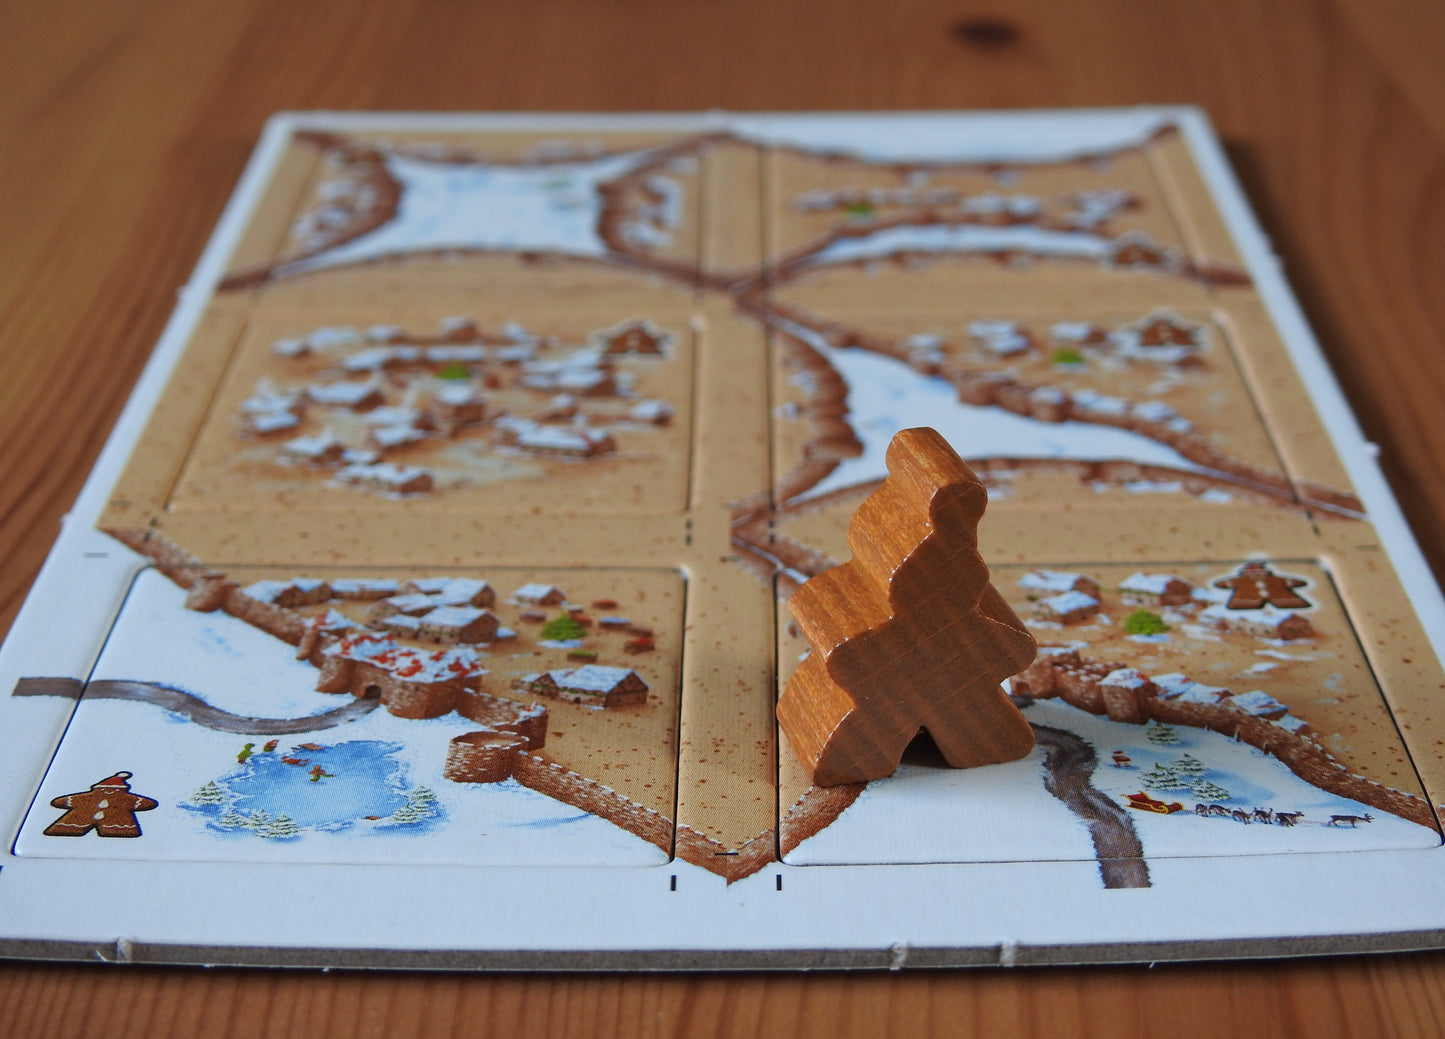 Another view of all the tiles and the gingerbread meeple figure.